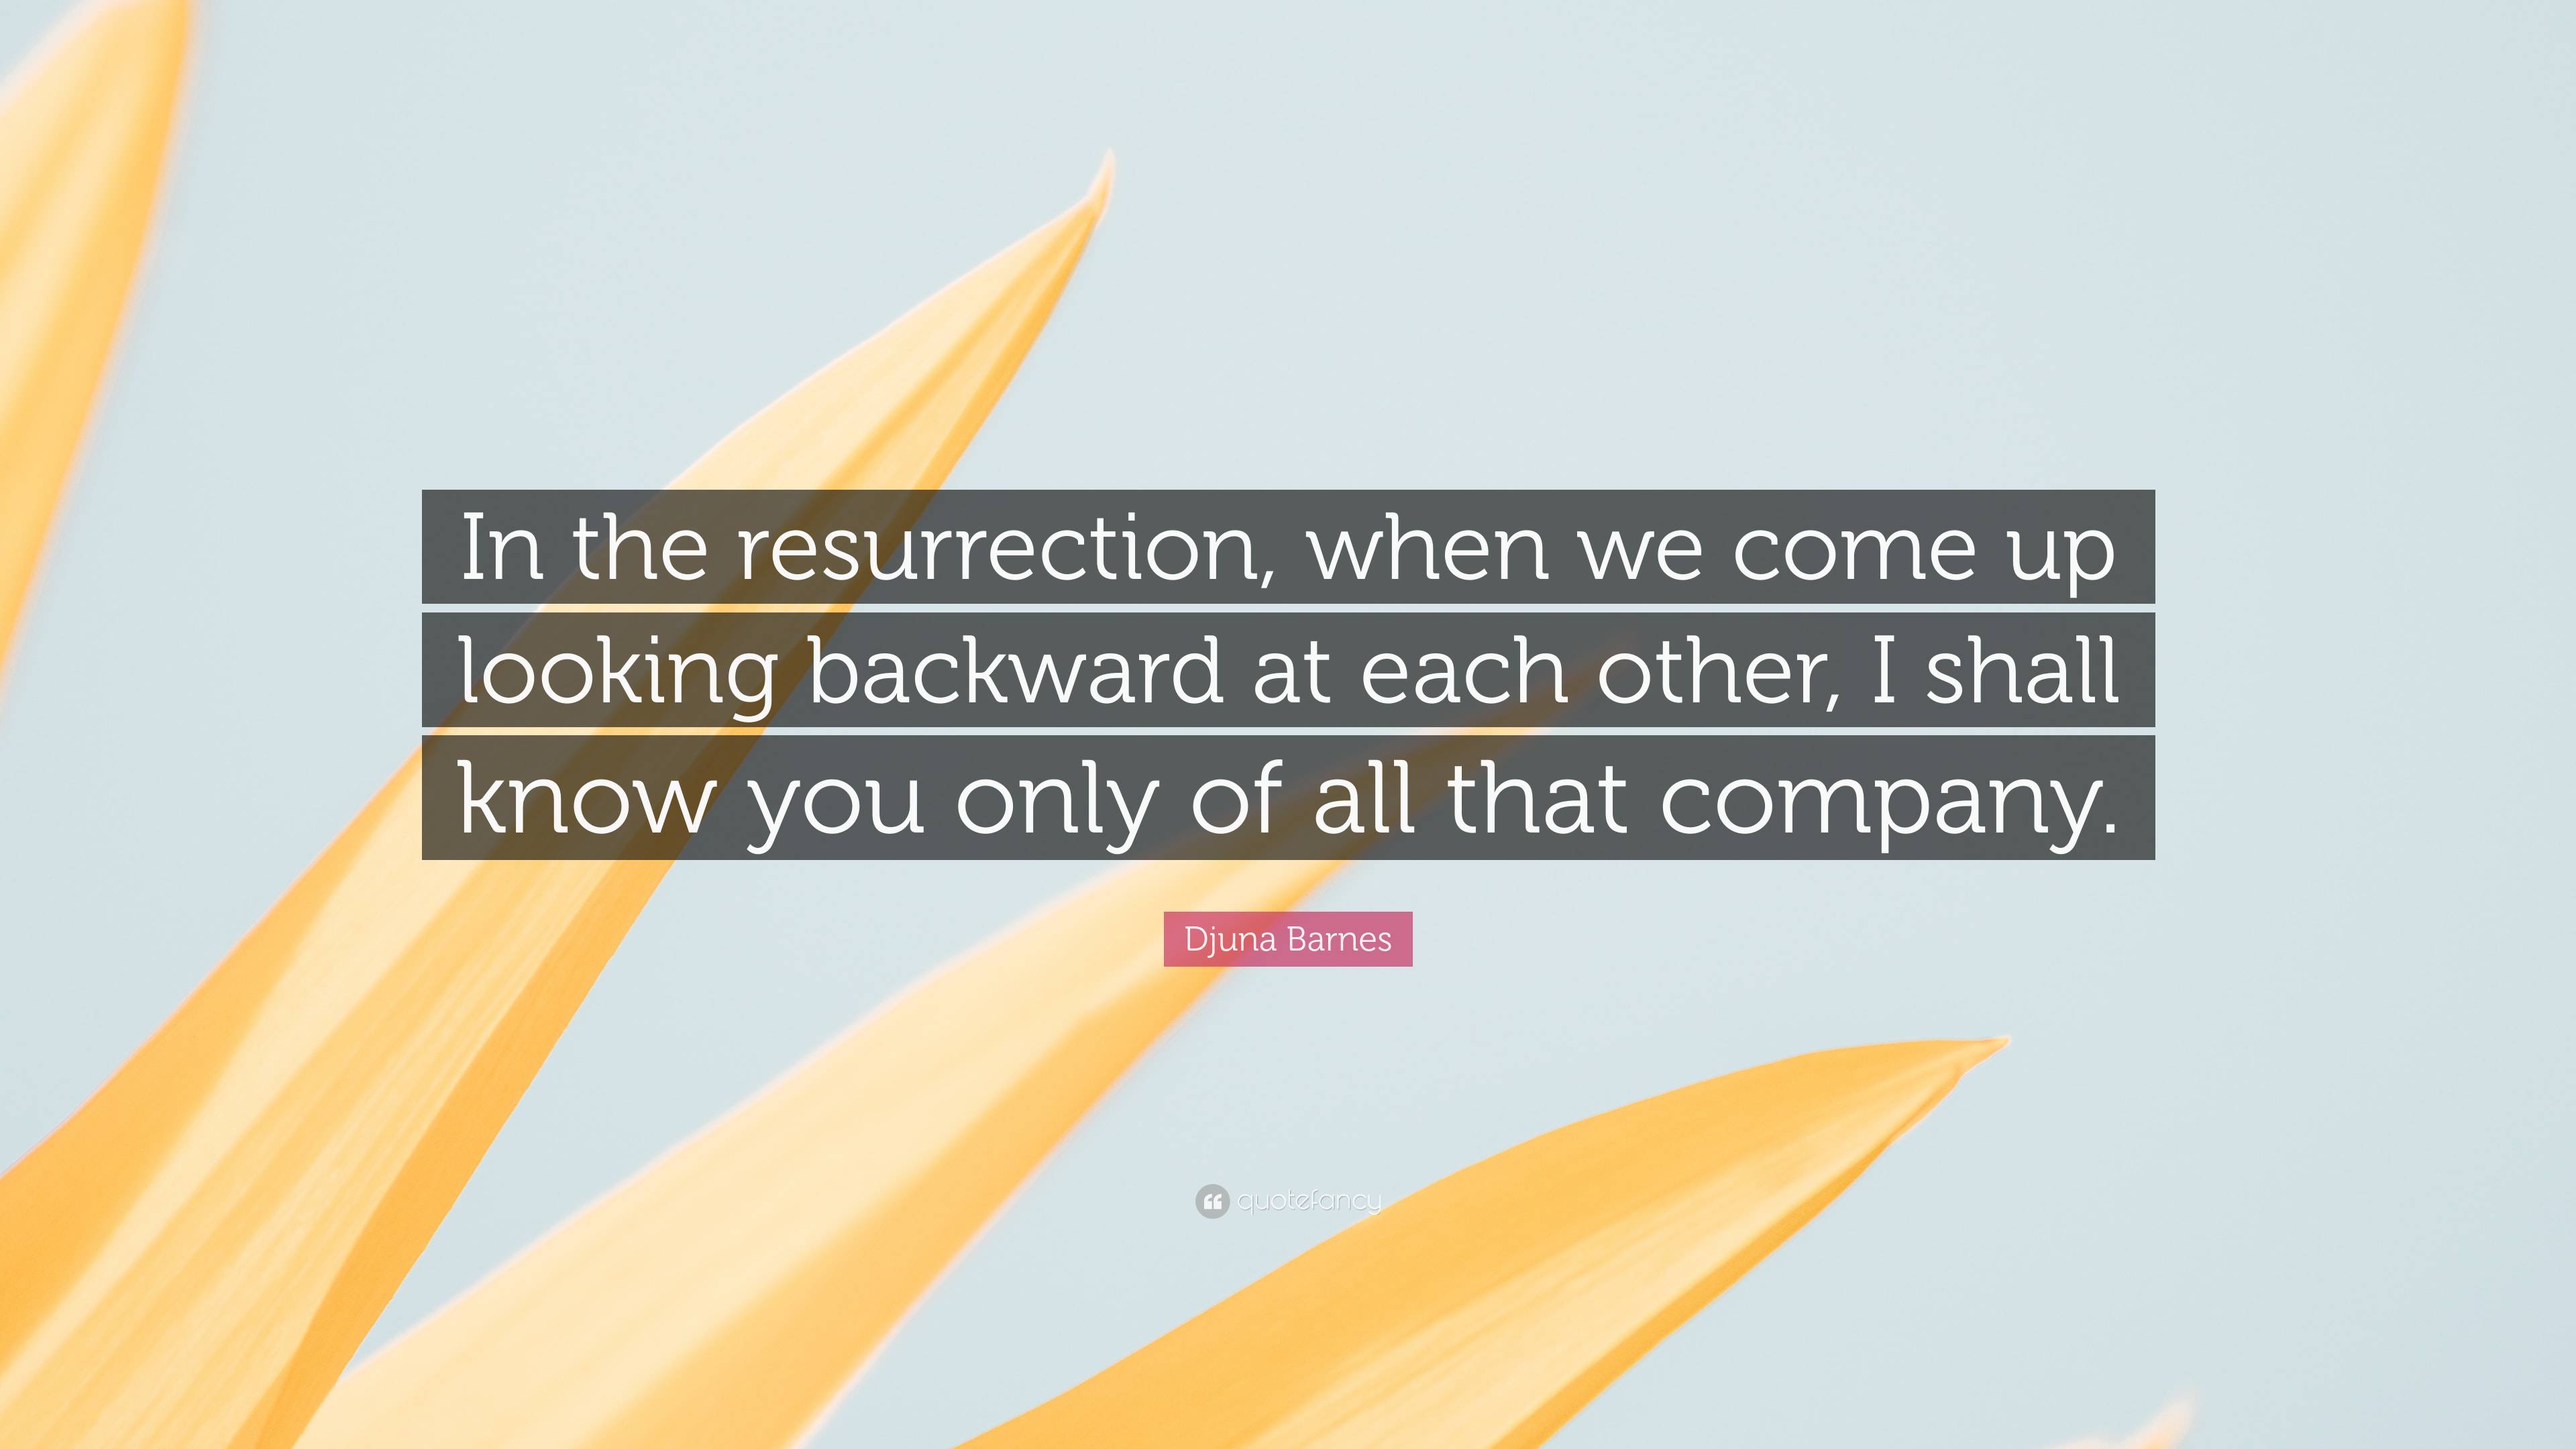 Djuna Barnes Quote: “In the resurrection, when we come up looking